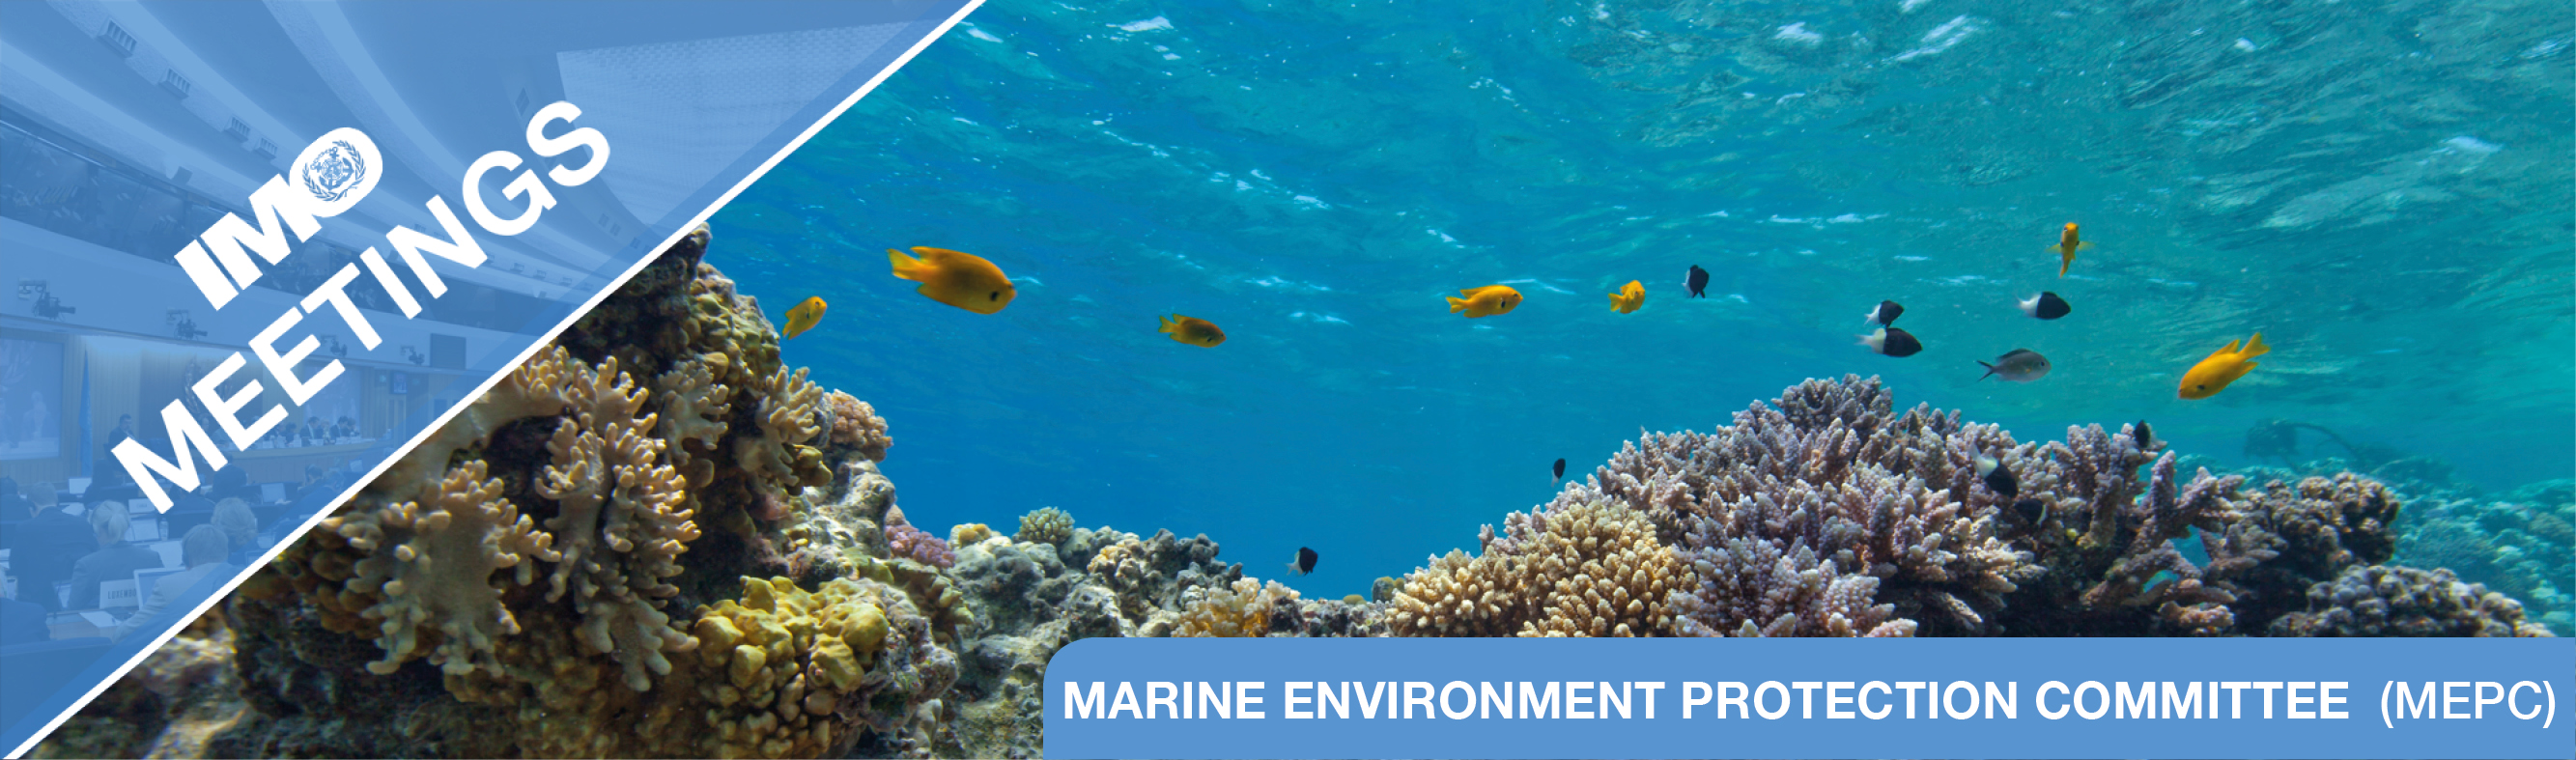 Preview: Marine Environment Protection Committee (MEPC), 74th session, 13-17 May 2019